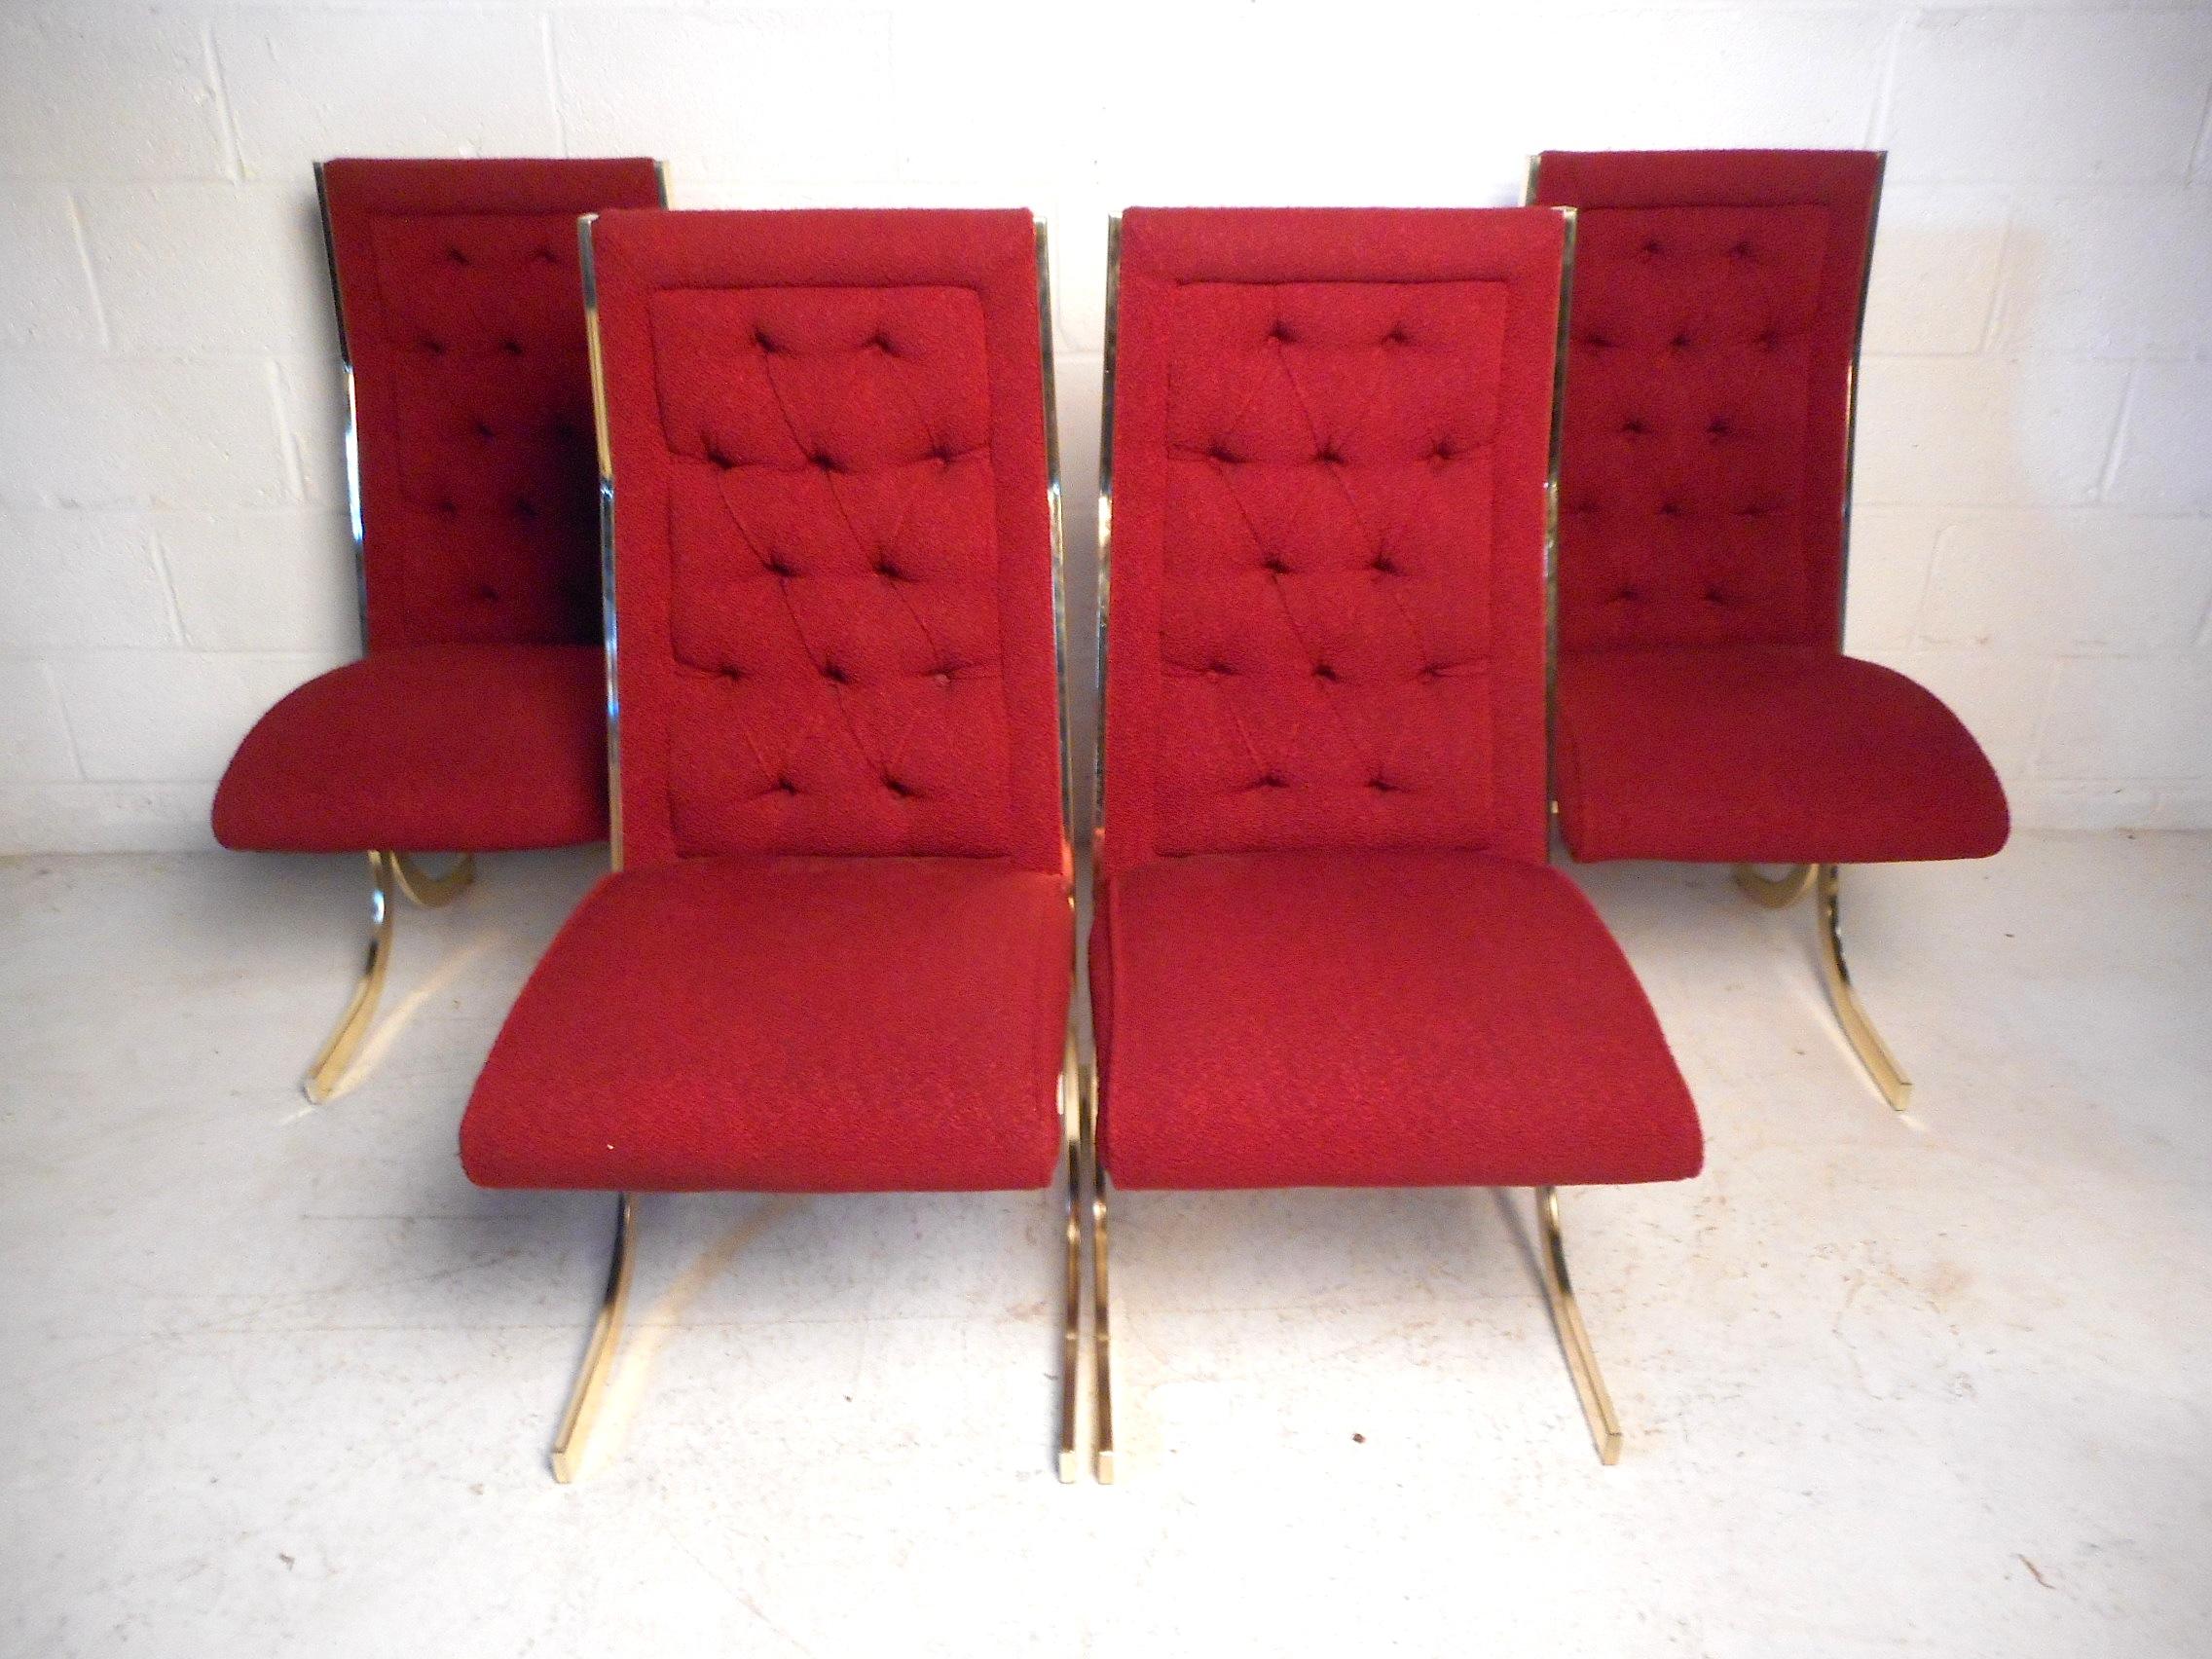 This impressive set of midcentury dining chairs feature beautiful red vintage upholstery covering a tufted backrest and plush seating. The brass-plated base employs an interesting design which enhances the chairs' unique visual profile. An